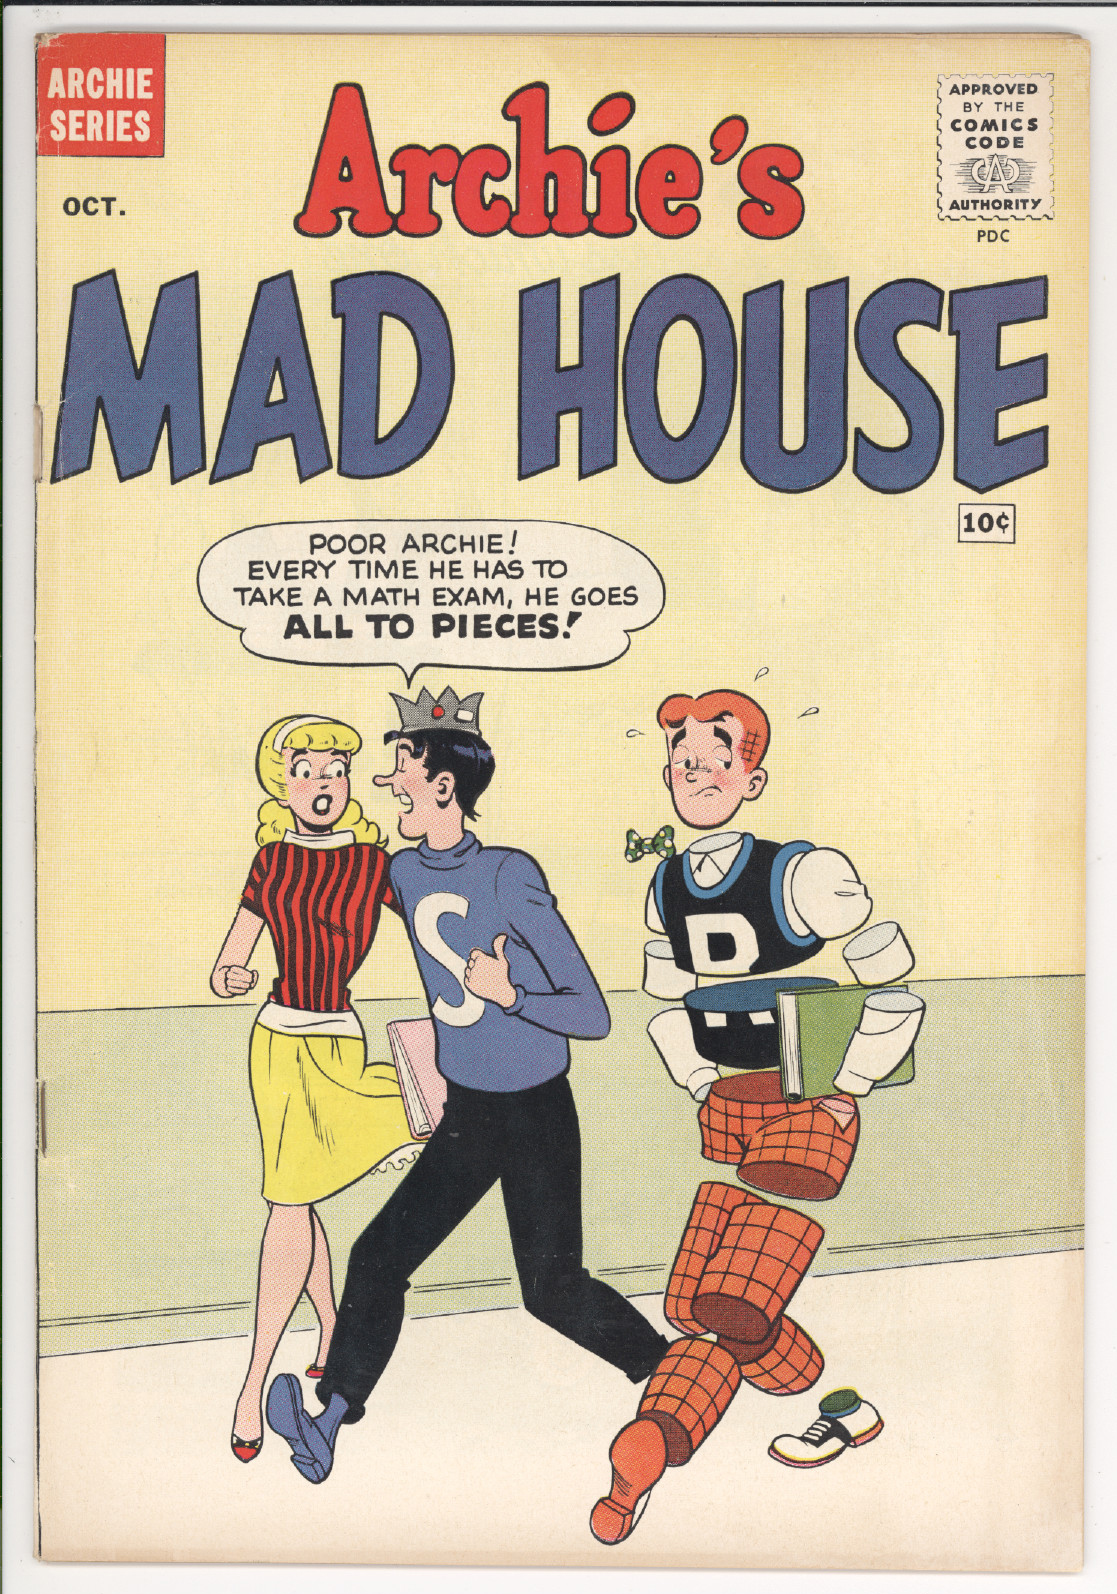 Archie's Mad house   #8